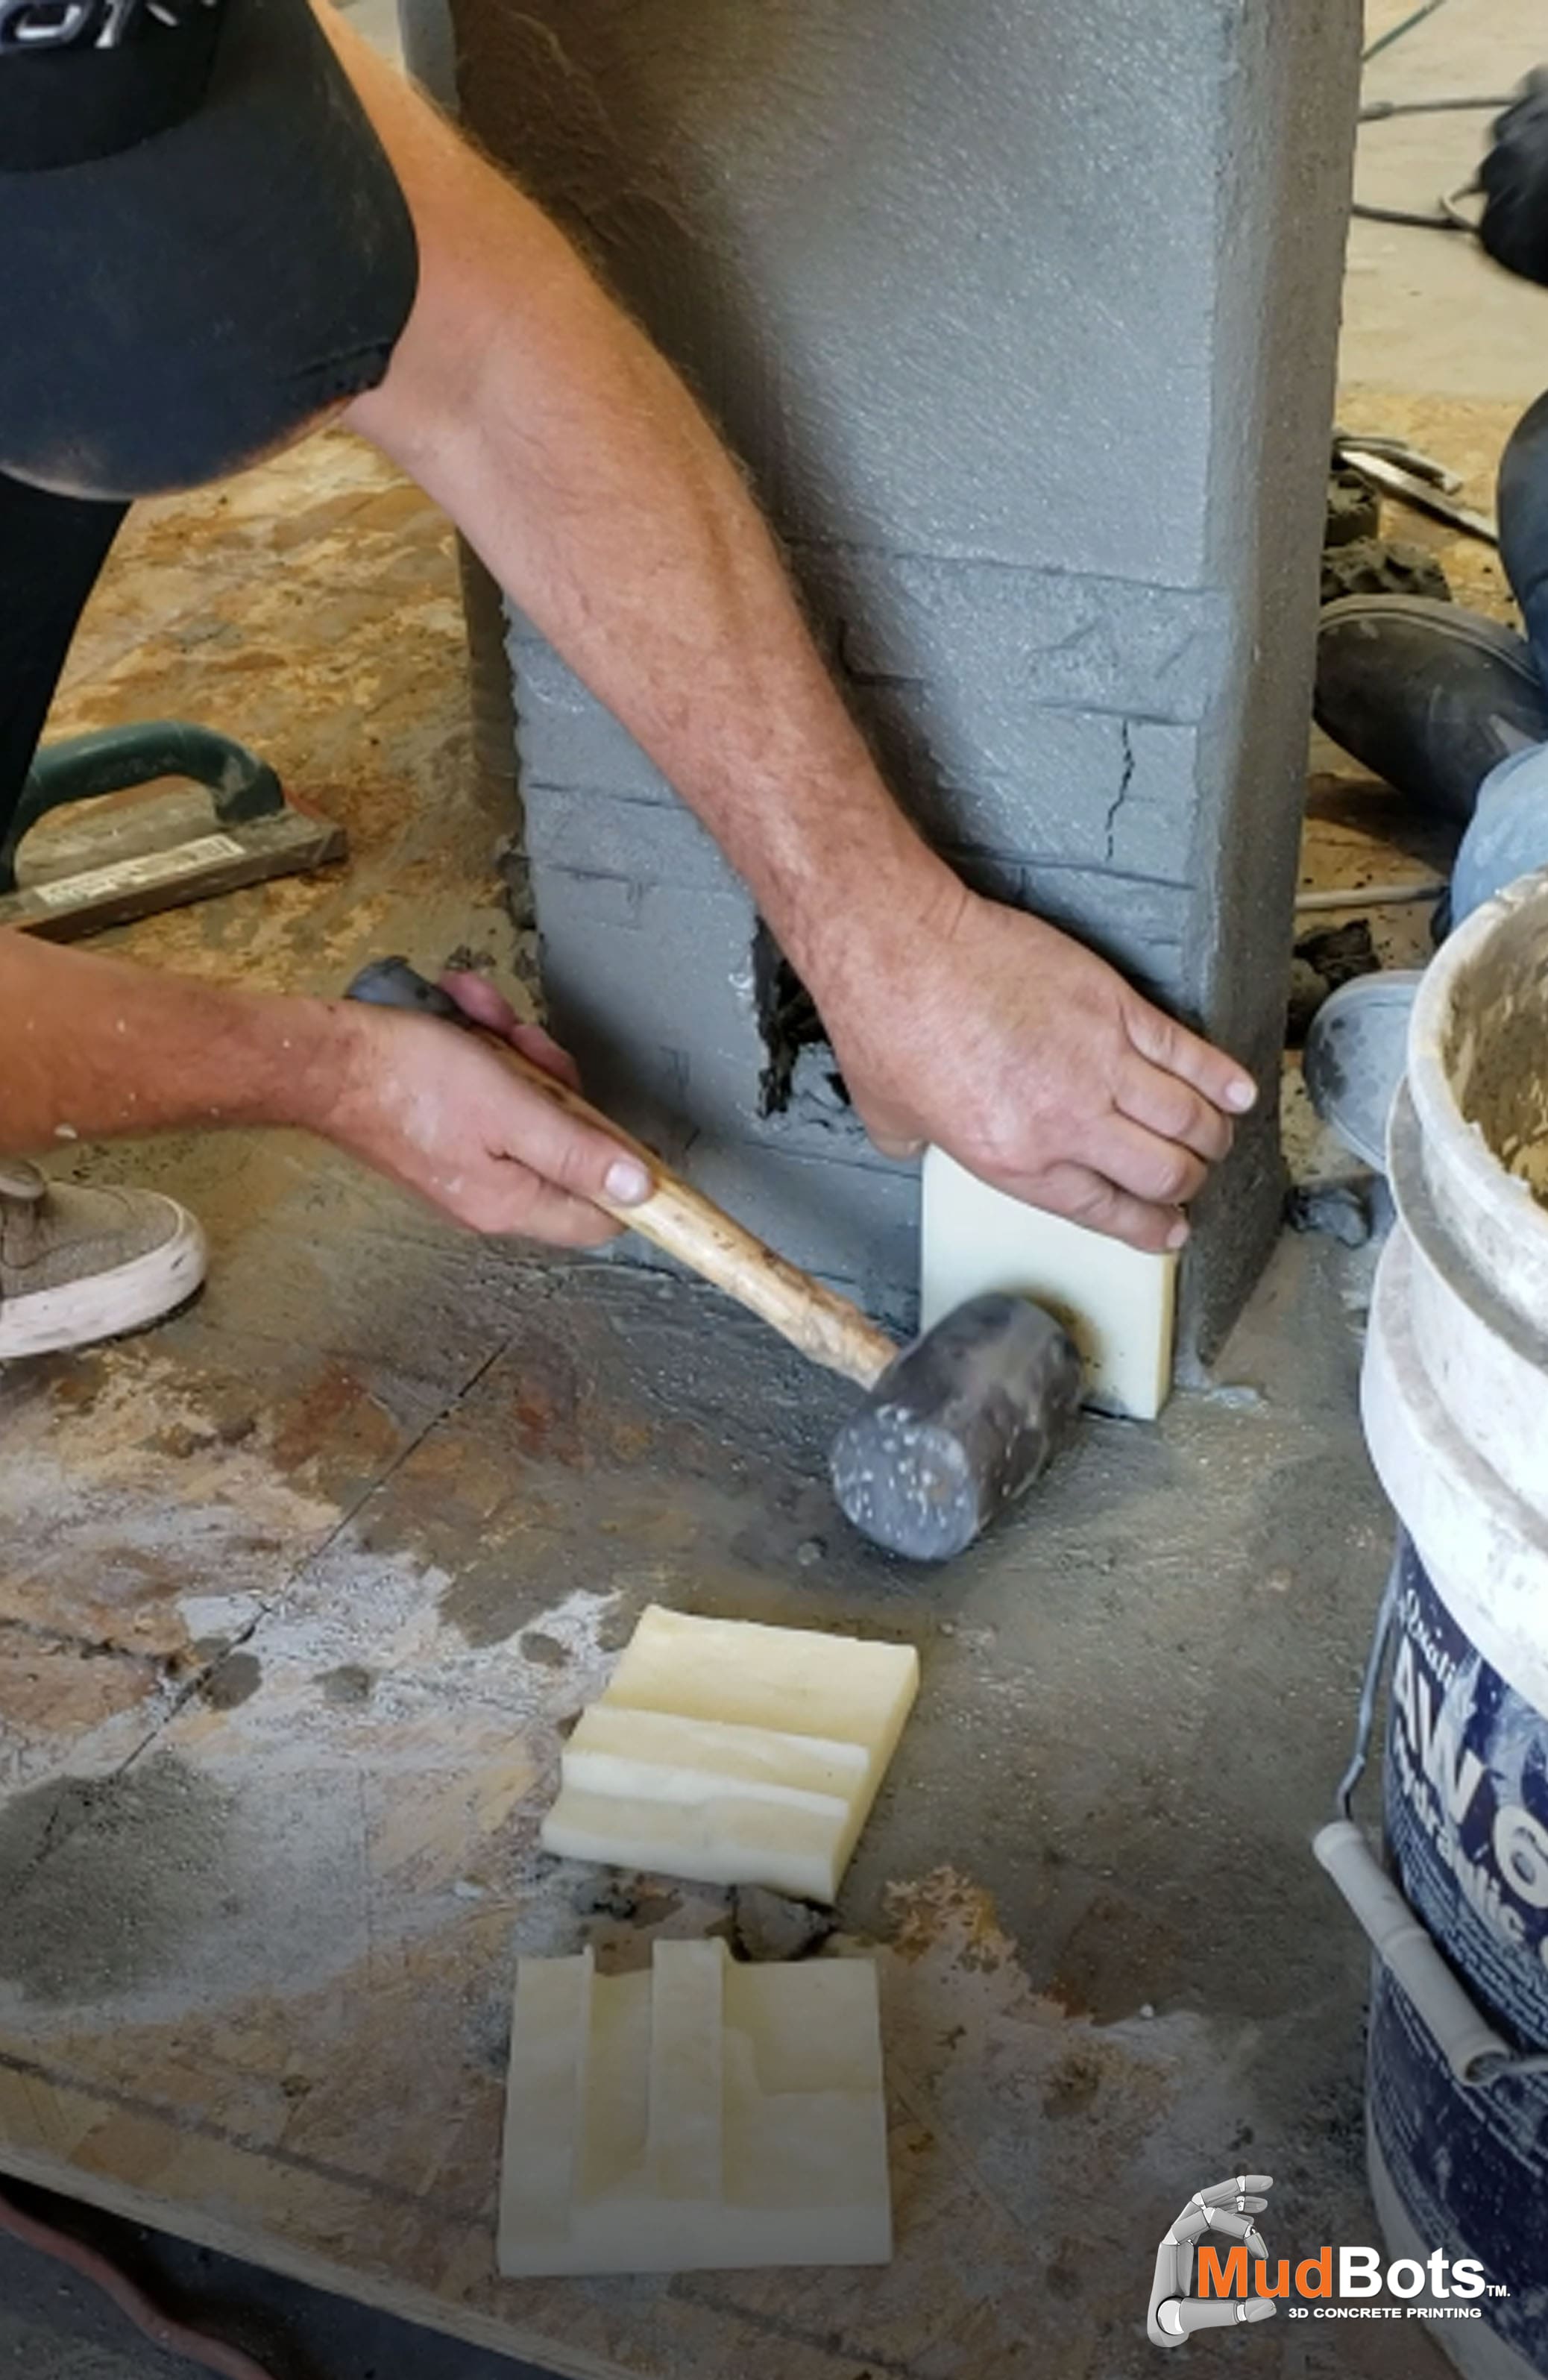 Every week we are asked to perform testing from some of the largest companies in construction. Here we are testing different stamping forms to determine the mix that is necessary to enable the tamping required to transfer the form design to the wall. There are hundreds of different mix formulas. The key is understanding the properties of base mixes and the myriad of additives that will provide engineers with the results their after. 